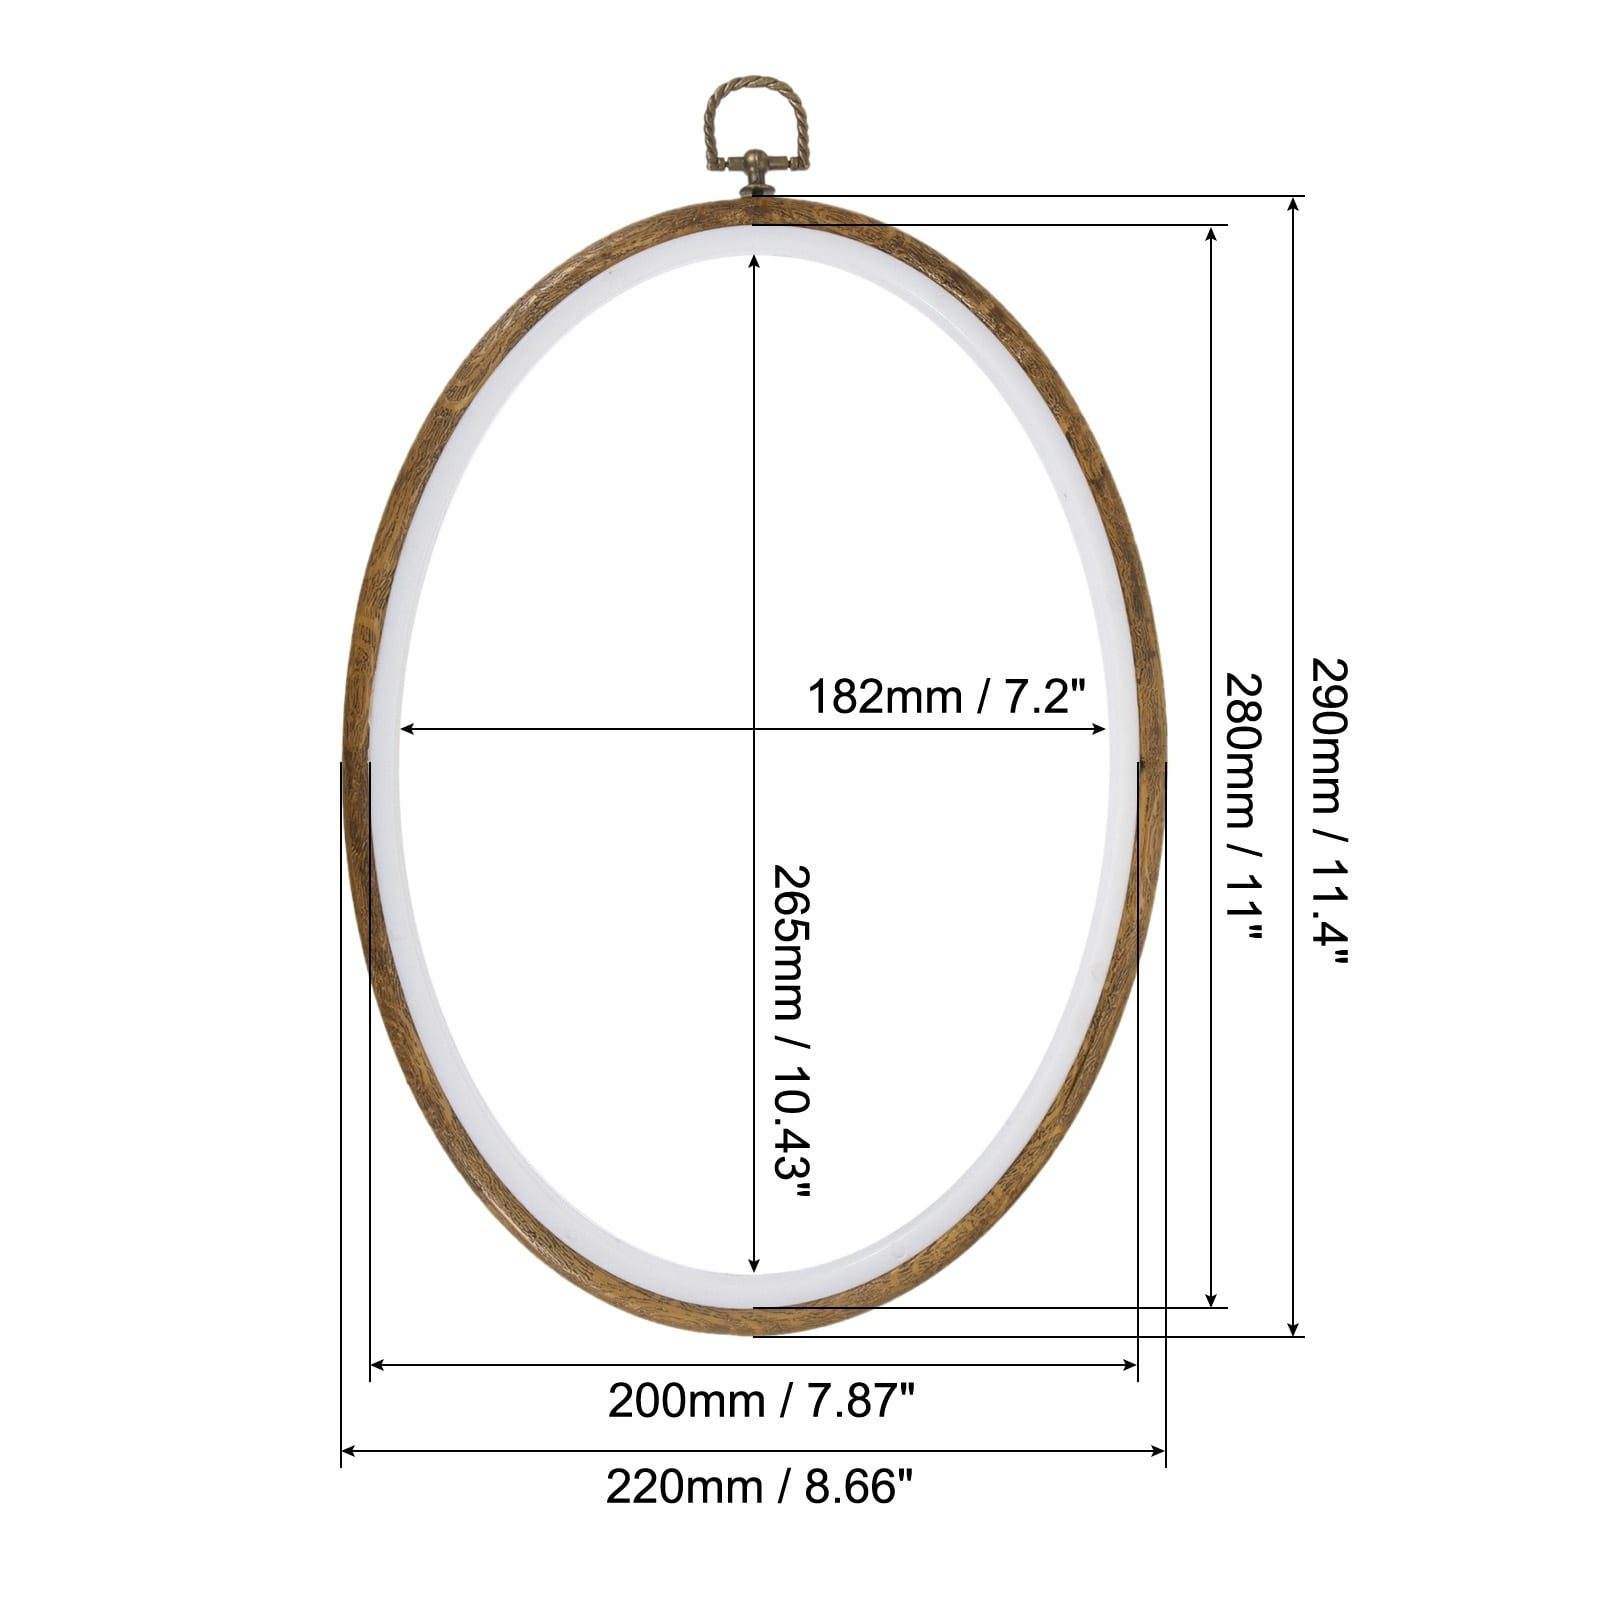 Dolity 4Pcs Embroidery Hoop Set Imitation Wood Circle Cross Stitch Hoop  Ring Frame for Embroidery and Cross Stitch DIY Needlepoint Sewing Tool |  Lazada PH